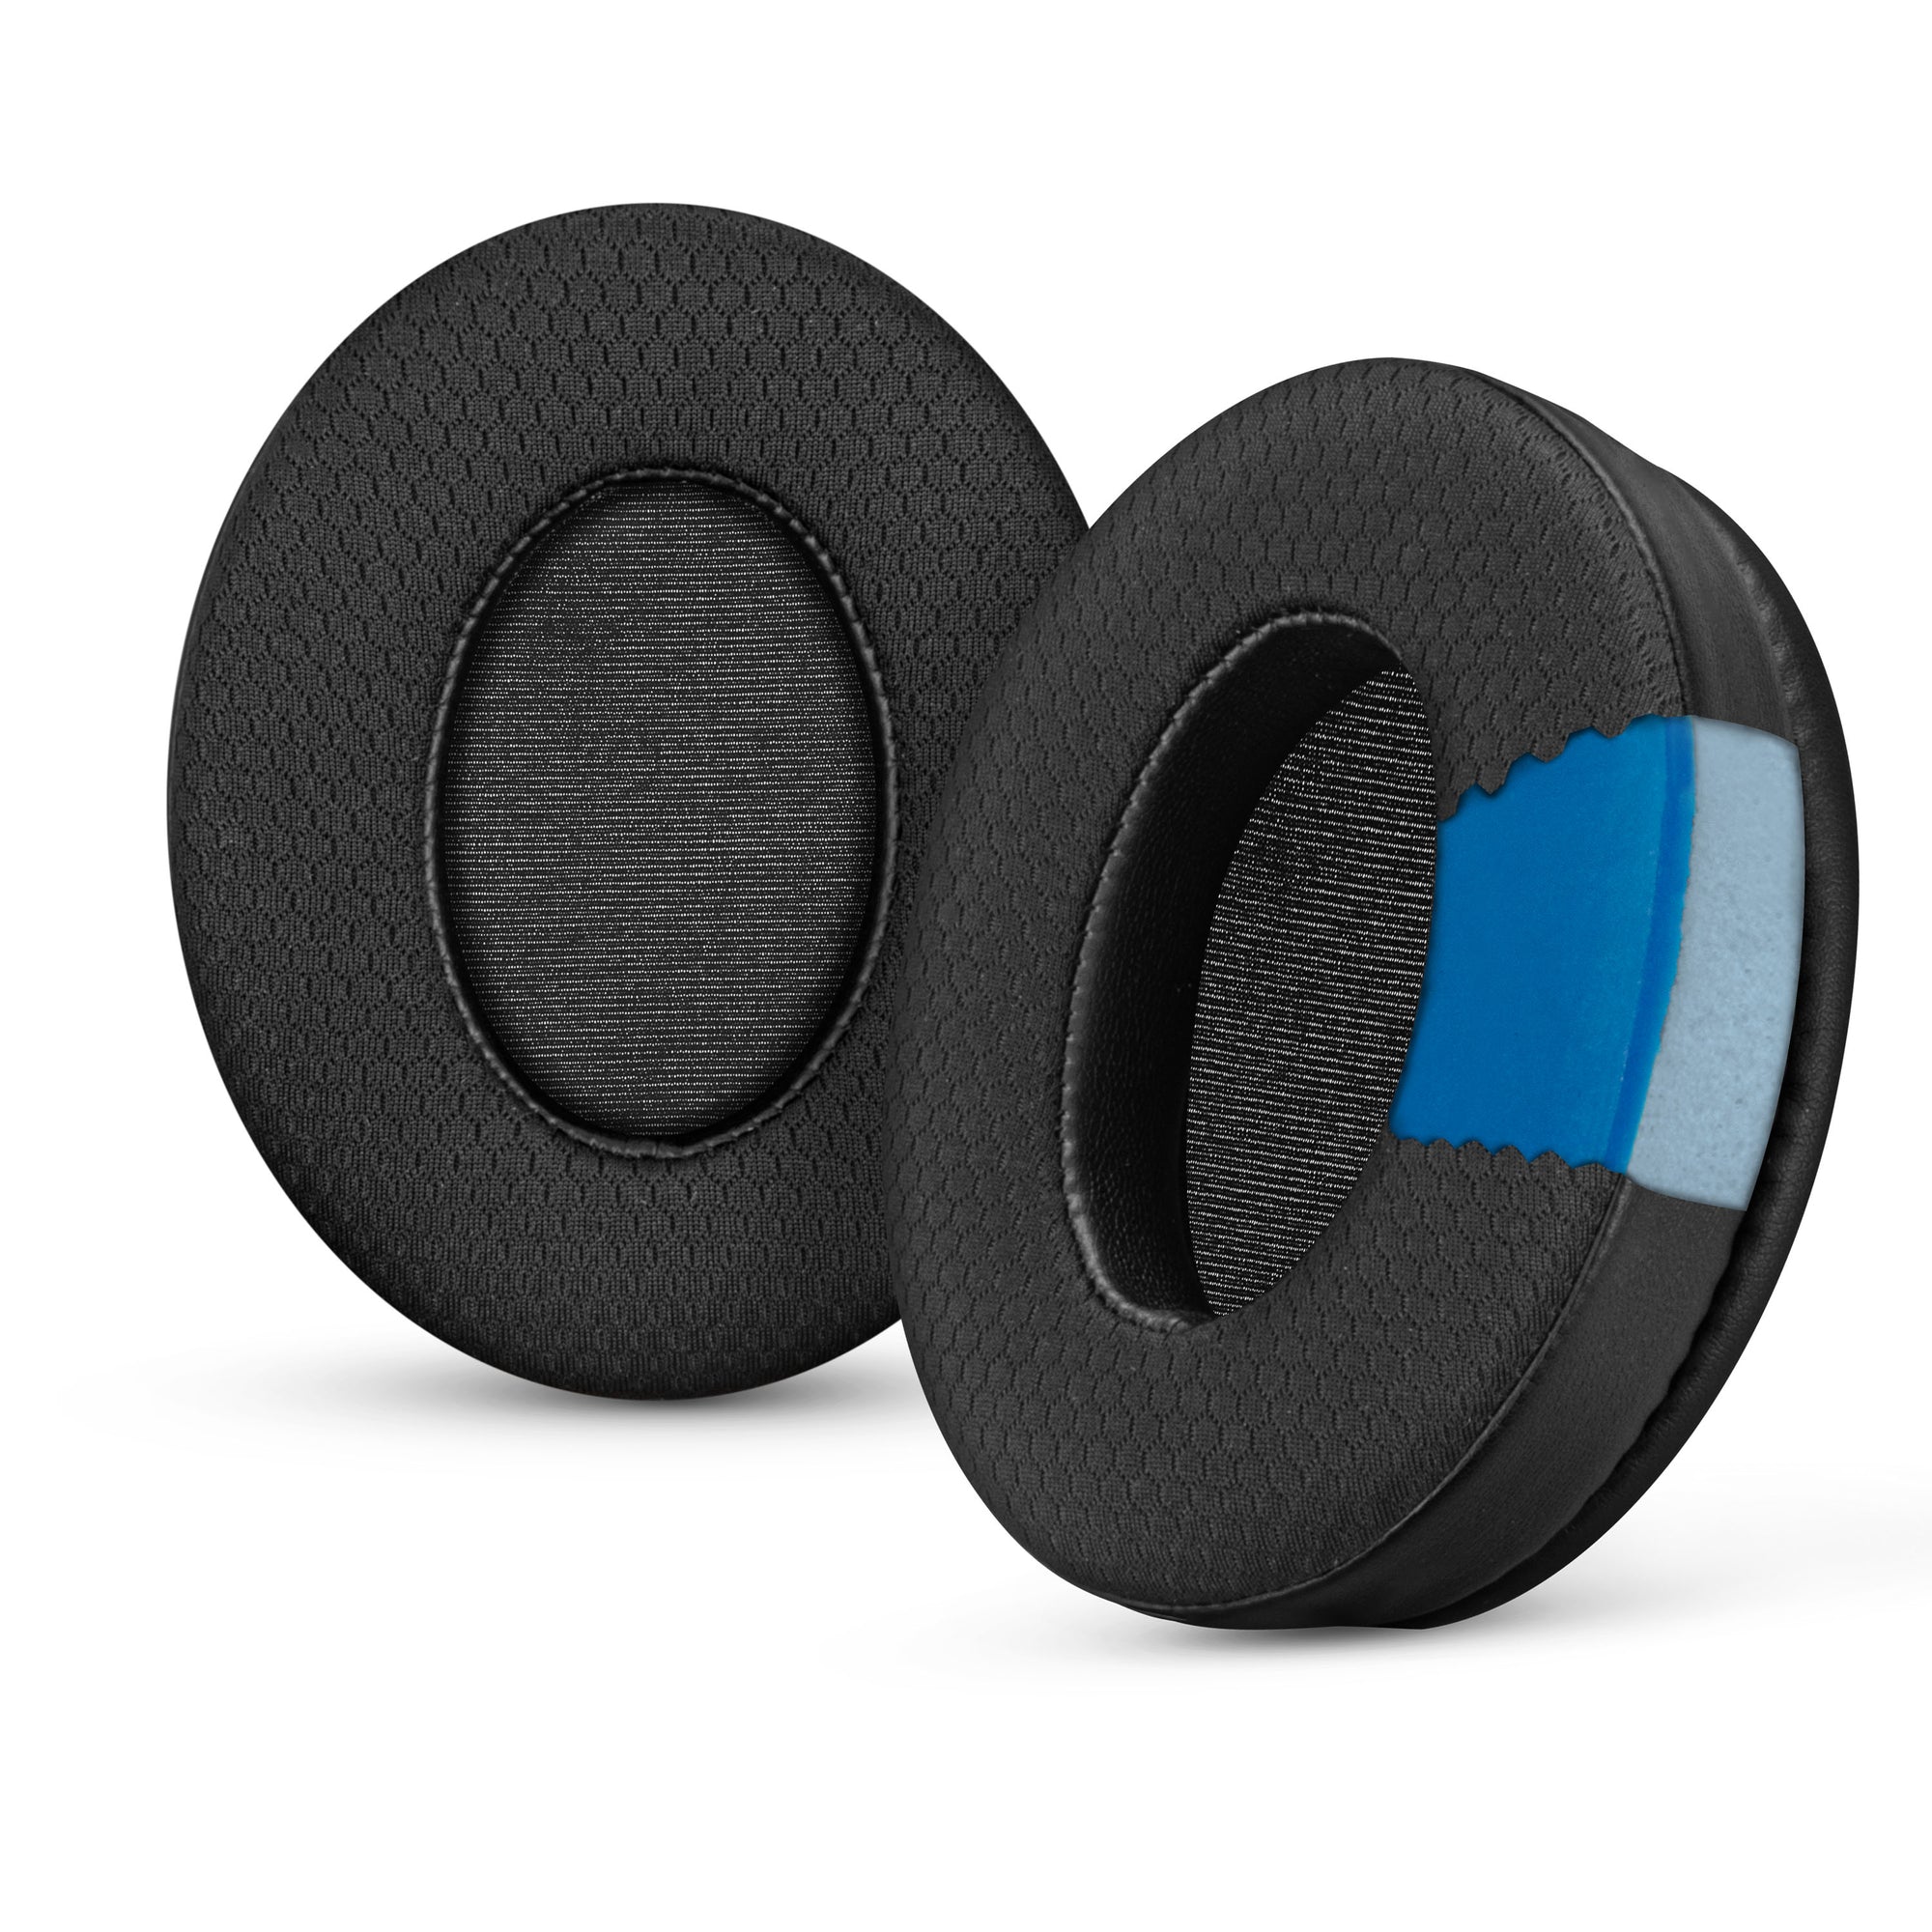 Hybrid Earpads for HyperX Cloud 1, 2 / 2 Wireless, Core, Flight / Flight S, Alpha / Alpha S Headsets & More, Soft Breathable fabric, Cooling Gel, Extra Comfort, Durable & Long Lasting